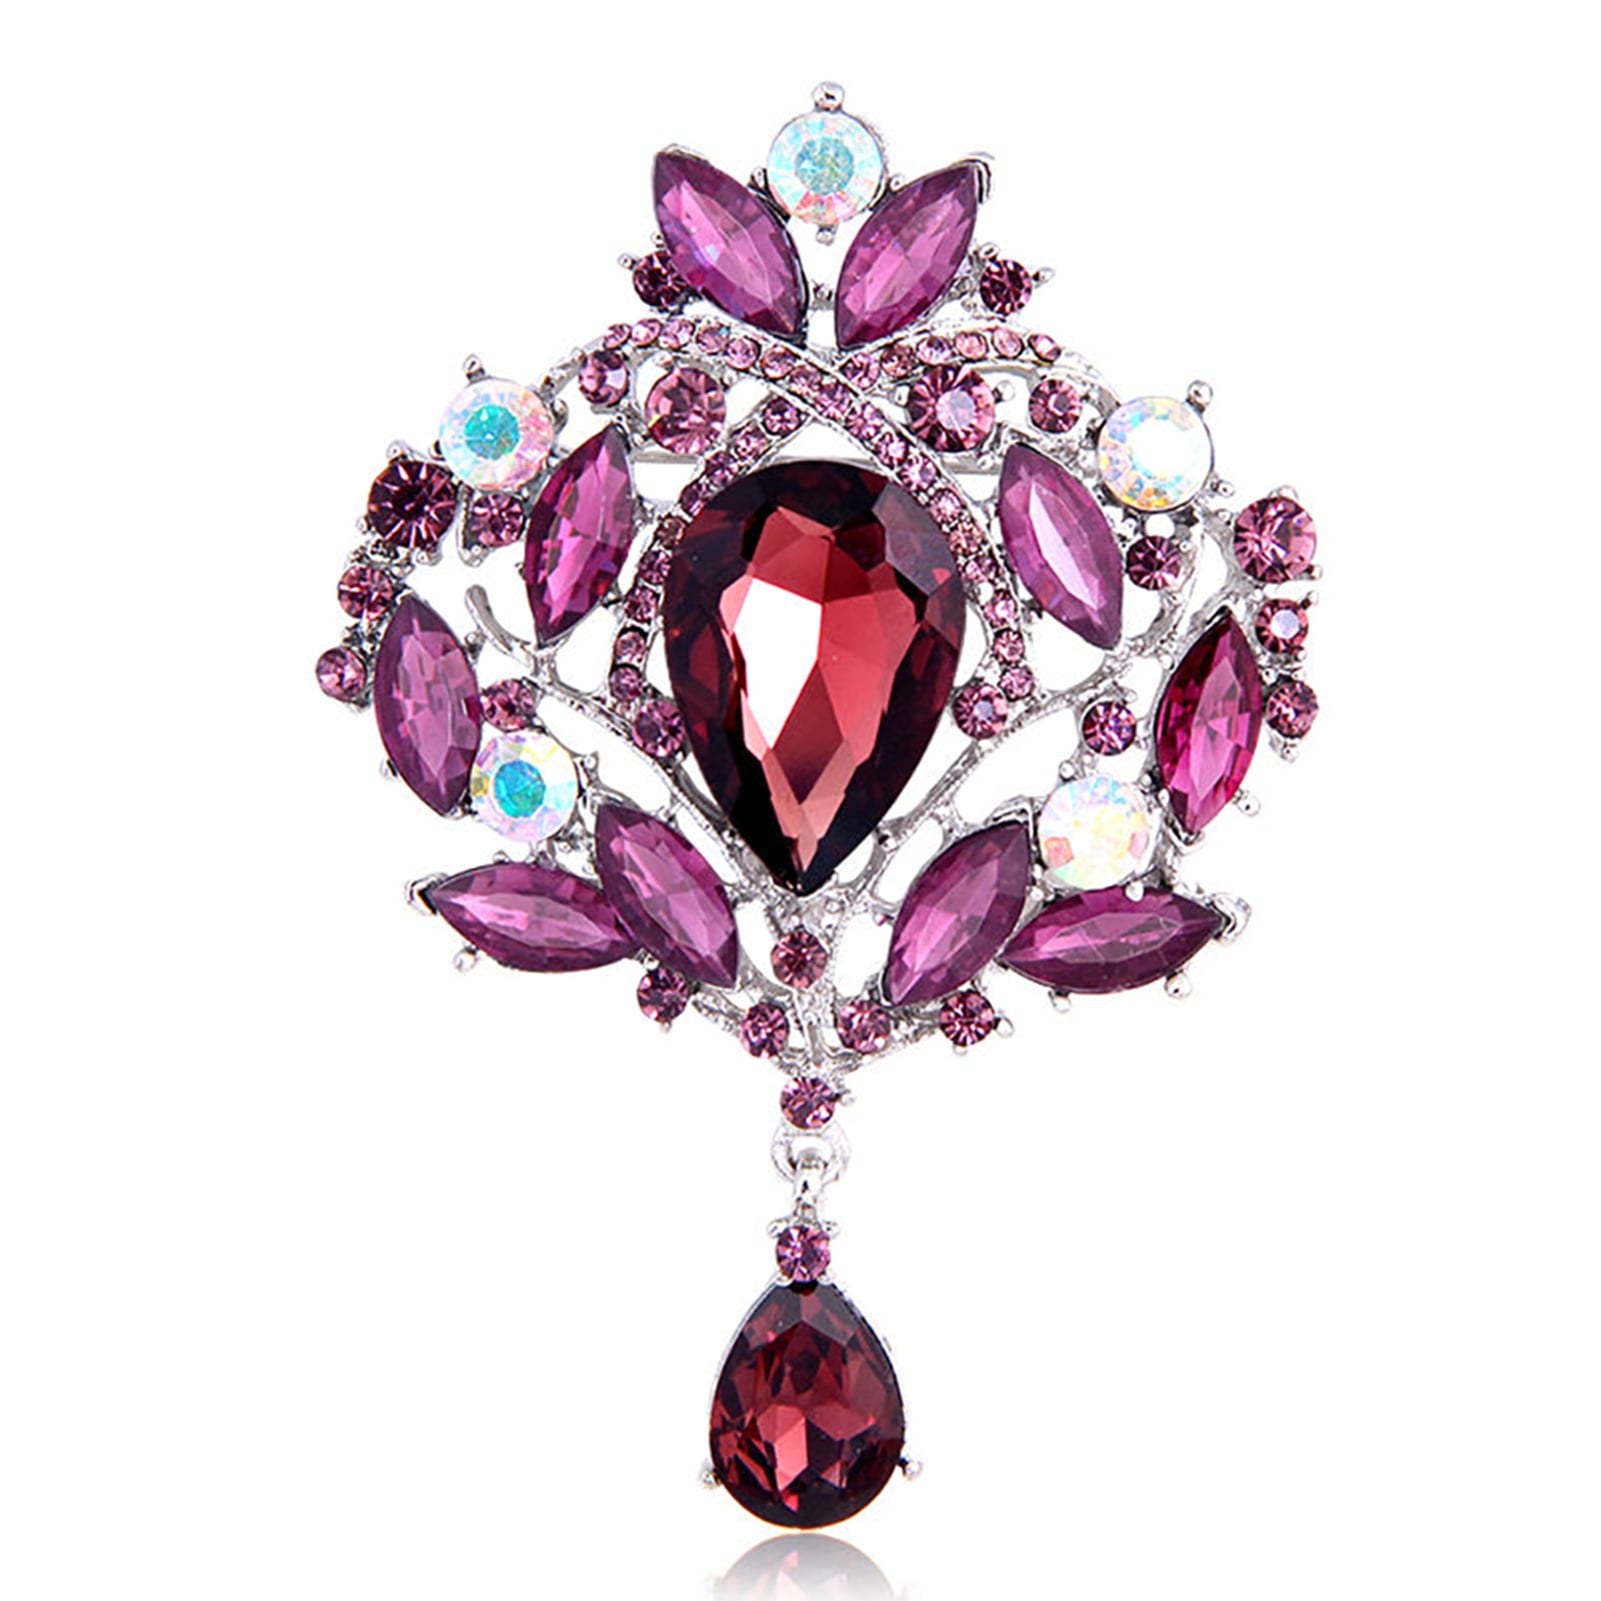 Sterling Silver W/ Rhodium-plated Created Ruby Earring Jacket 0.6IN Diameter